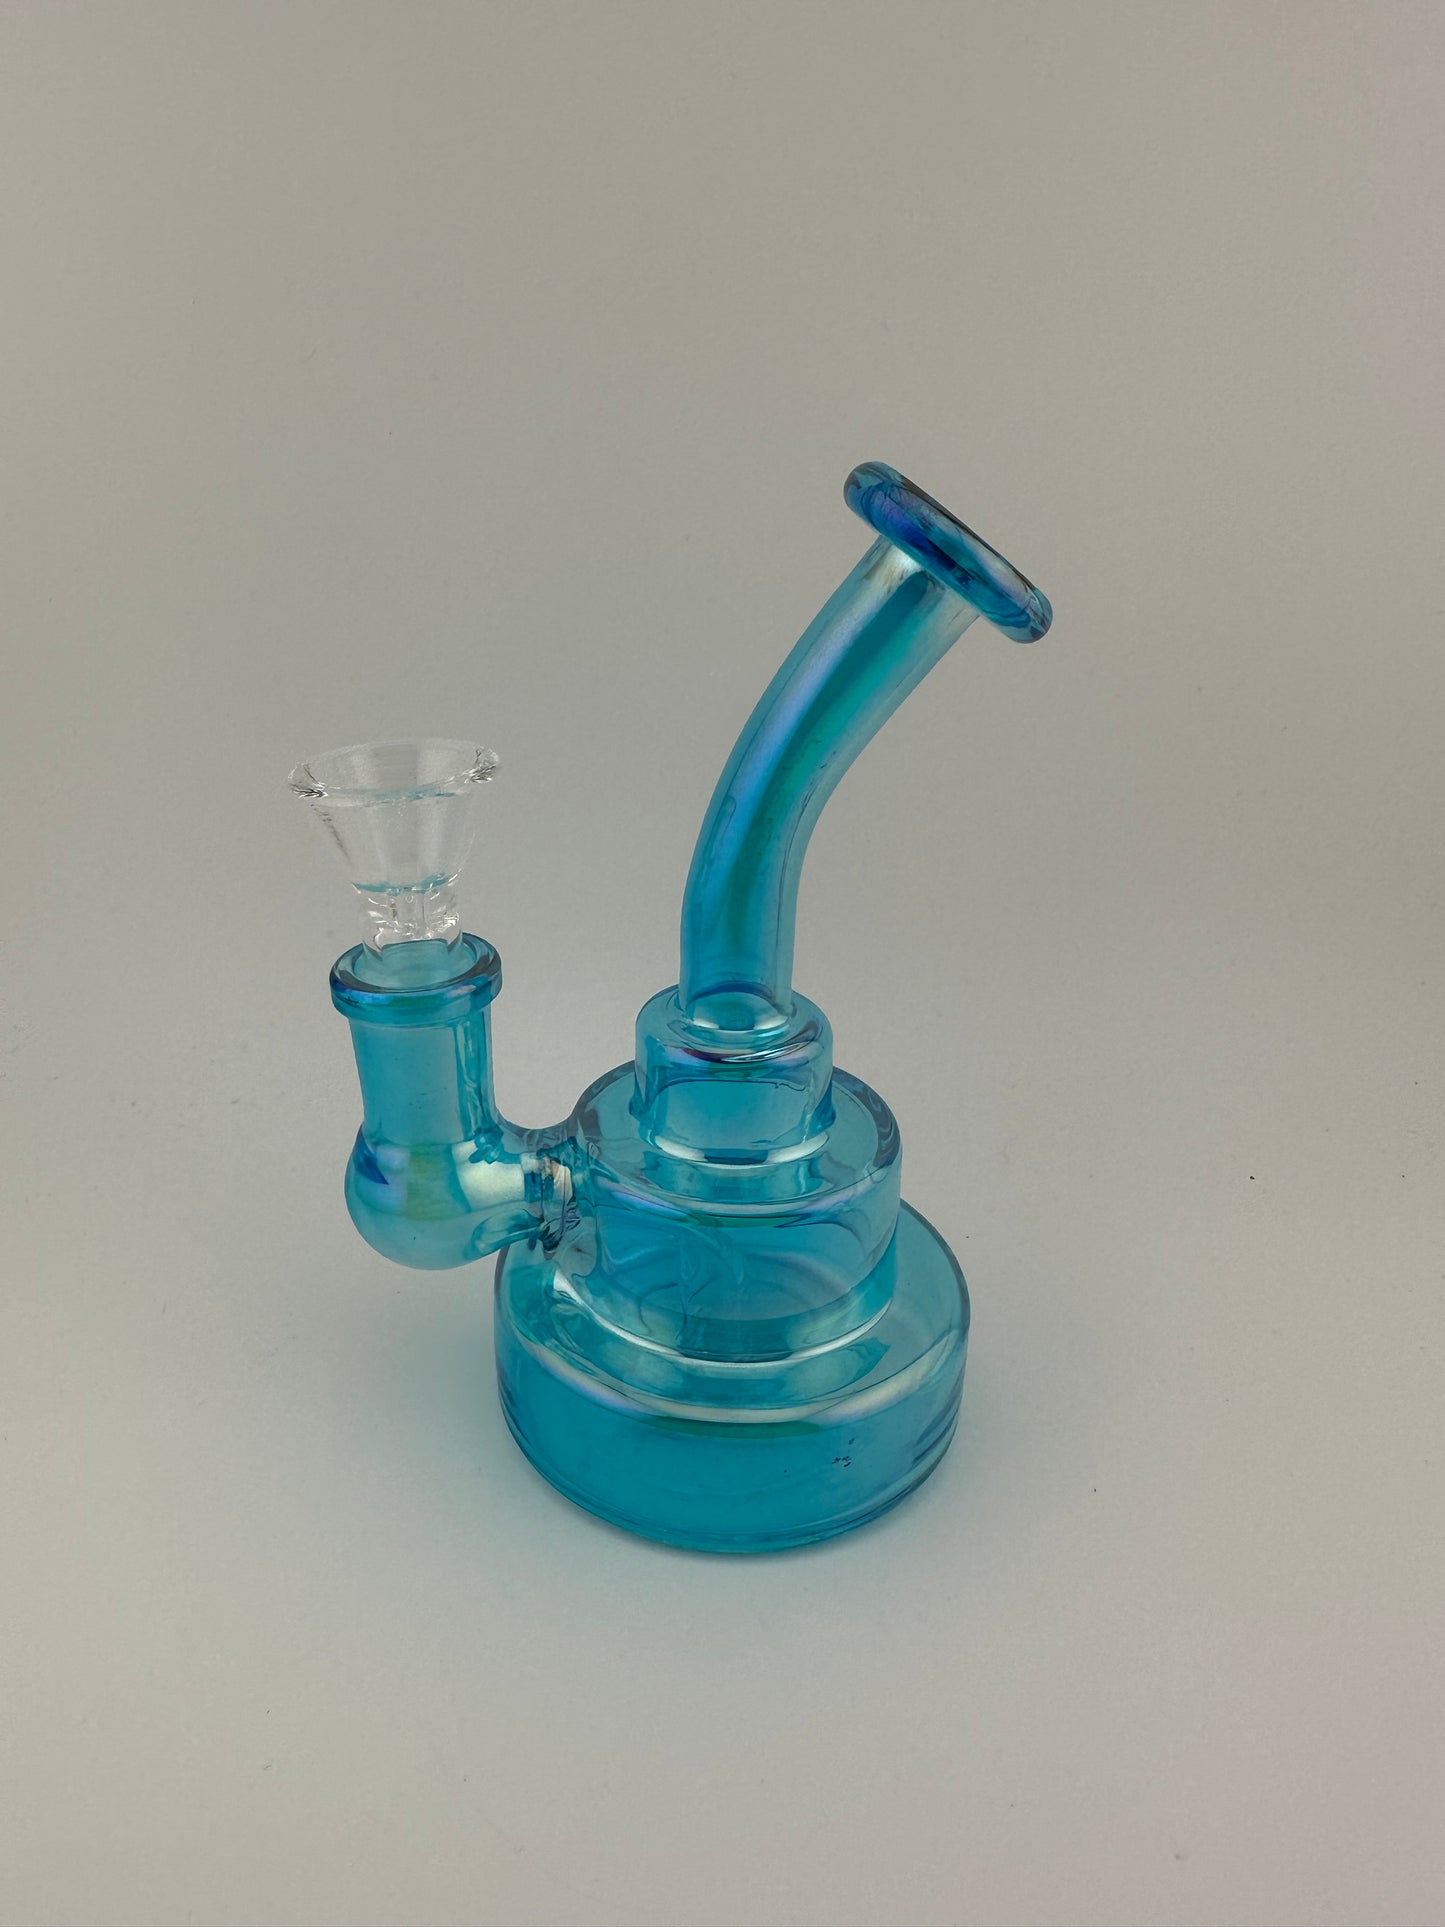 Electro Faded Glass Birthday Cake Rig